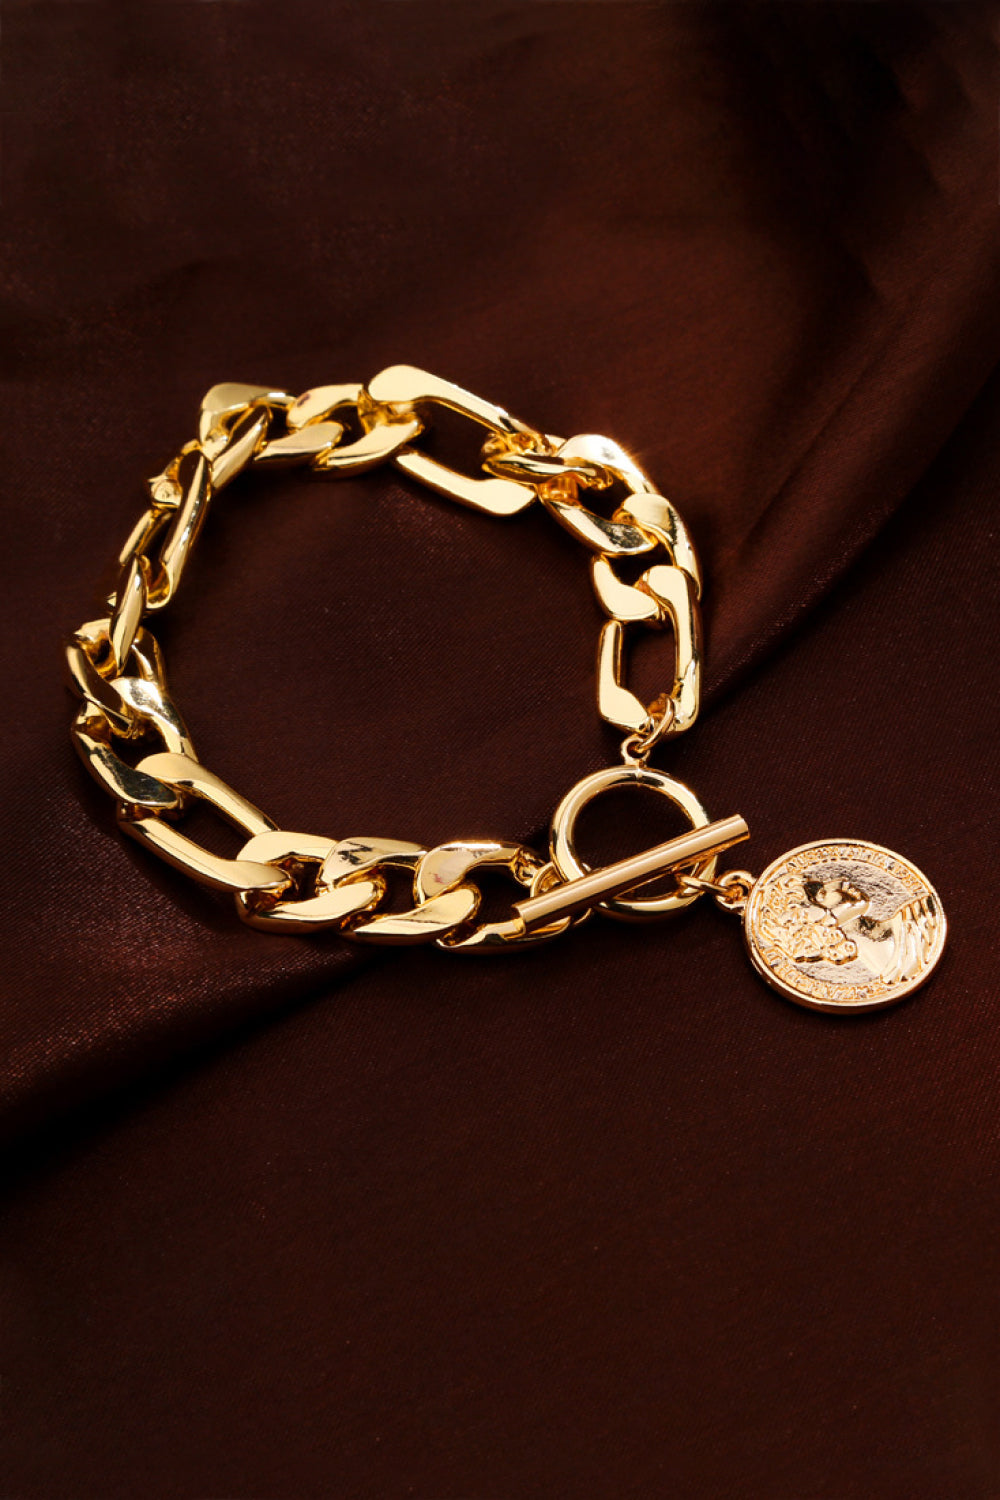 18k Gold Charm Bracelet with Antique Silver and Bronze Coins